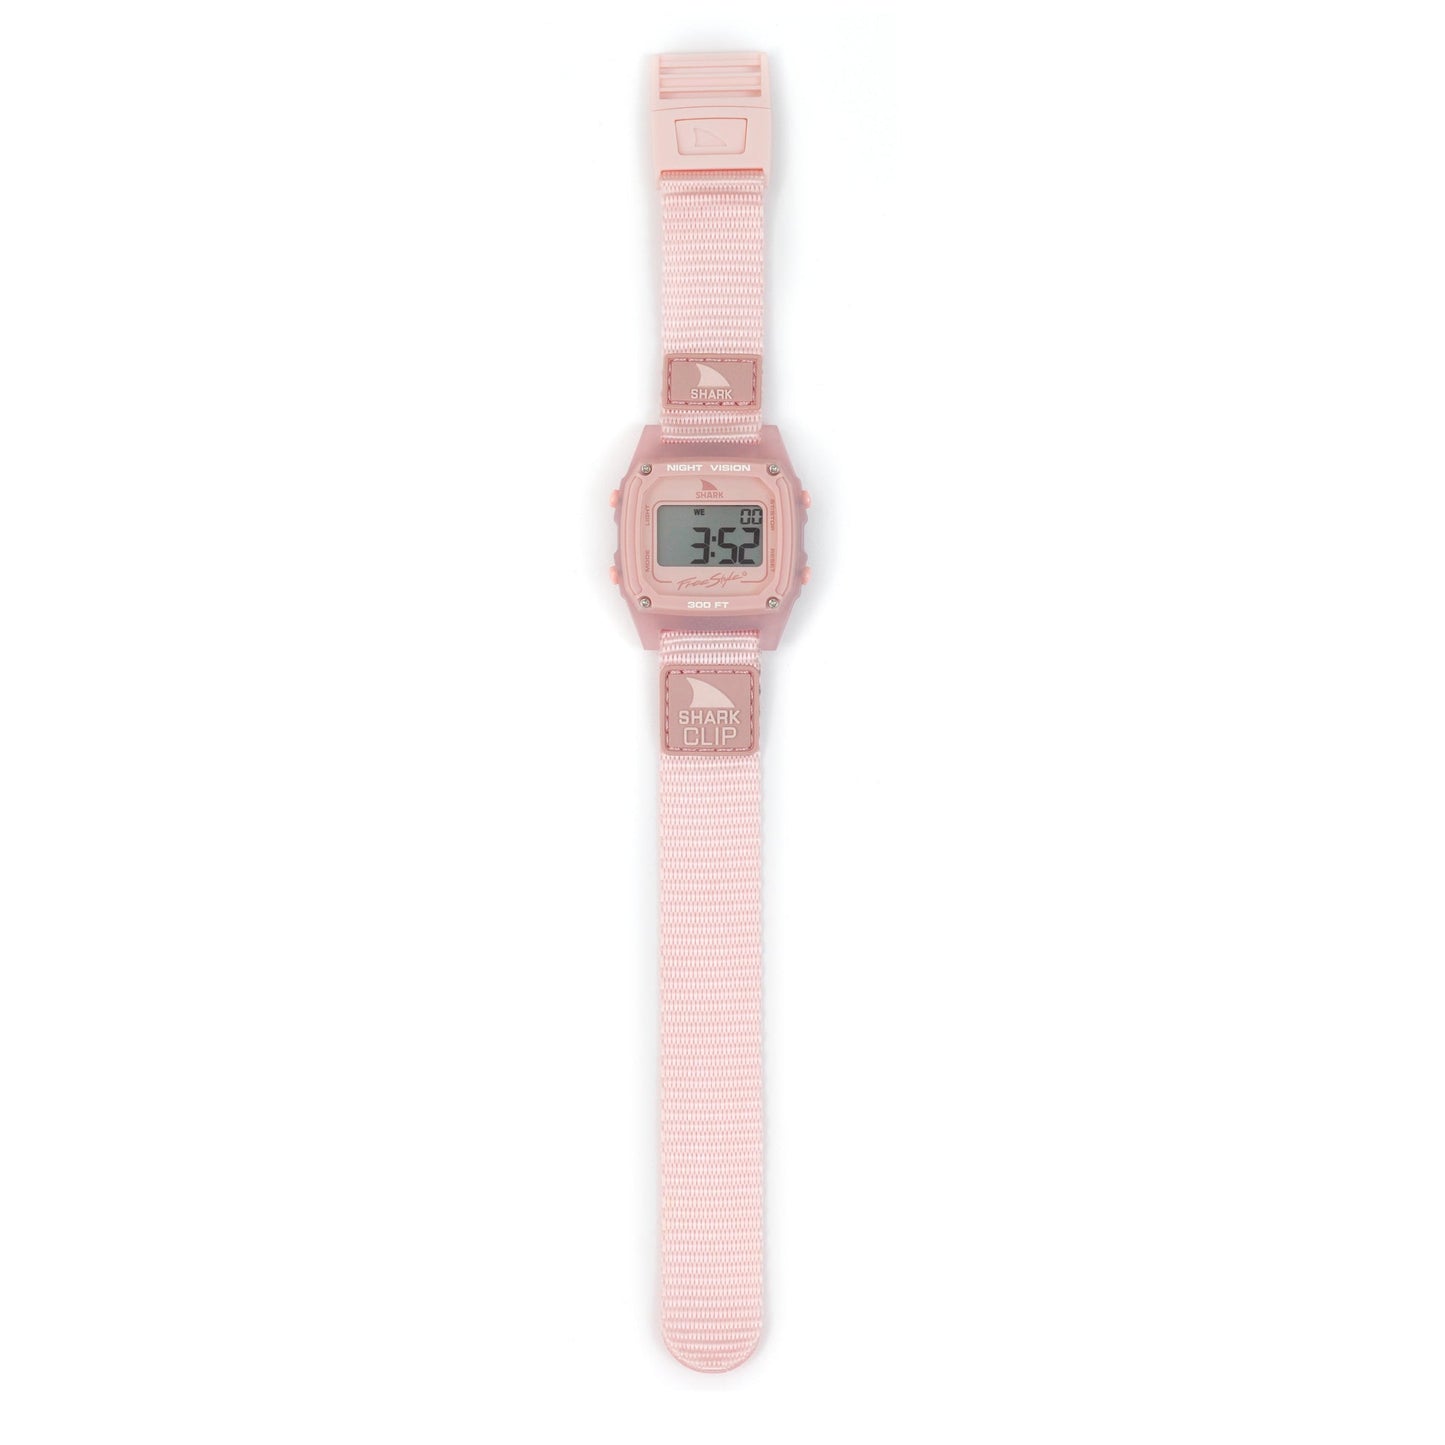 Freestyle Shark Classic Clip Watch - Rose